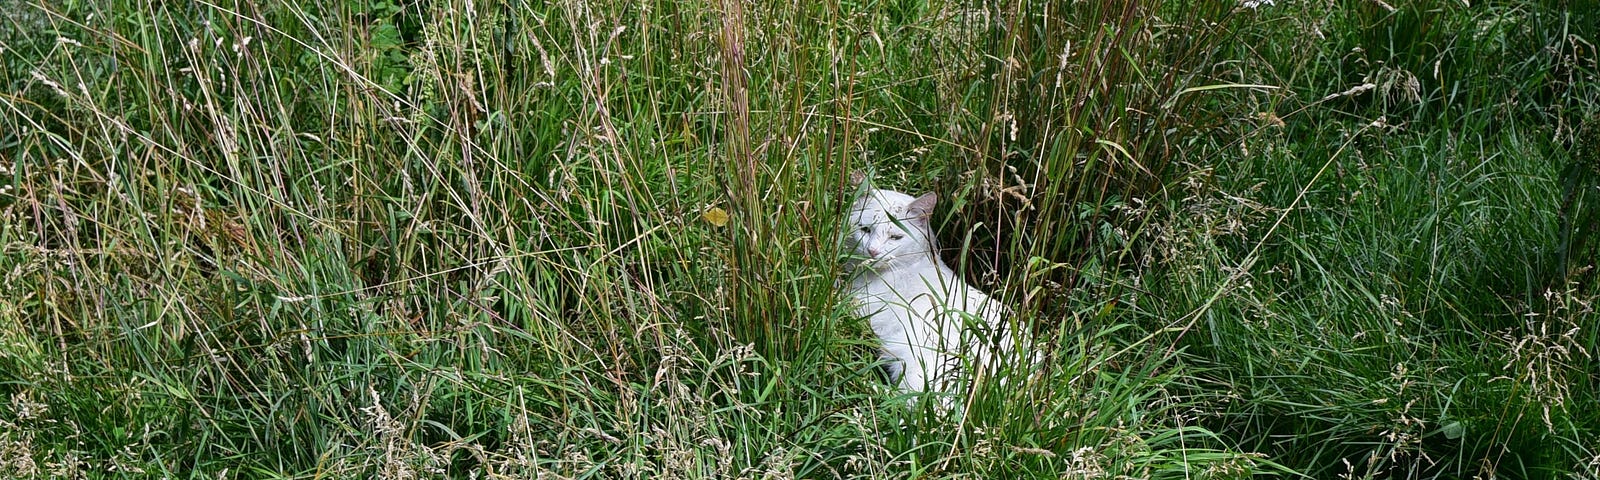 A white kitty in the tall grass with its head looking toward the camera